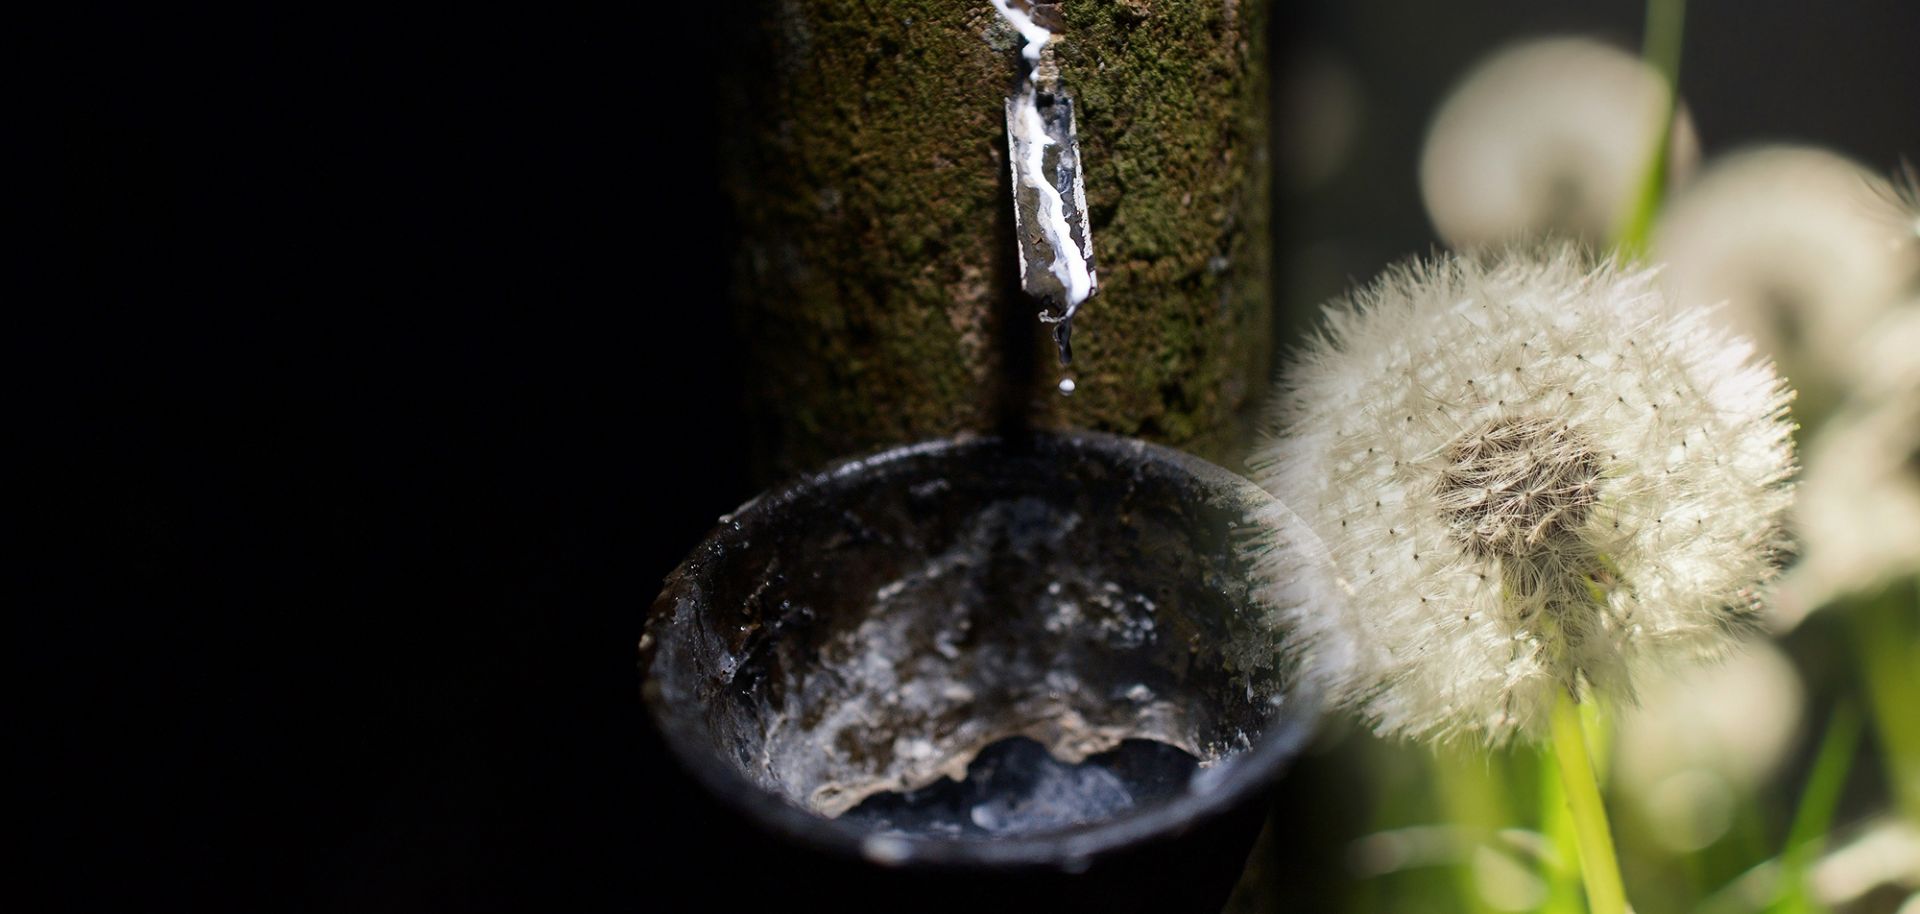 A rubber tapper harvests sap from a rubber tree in Brazil.